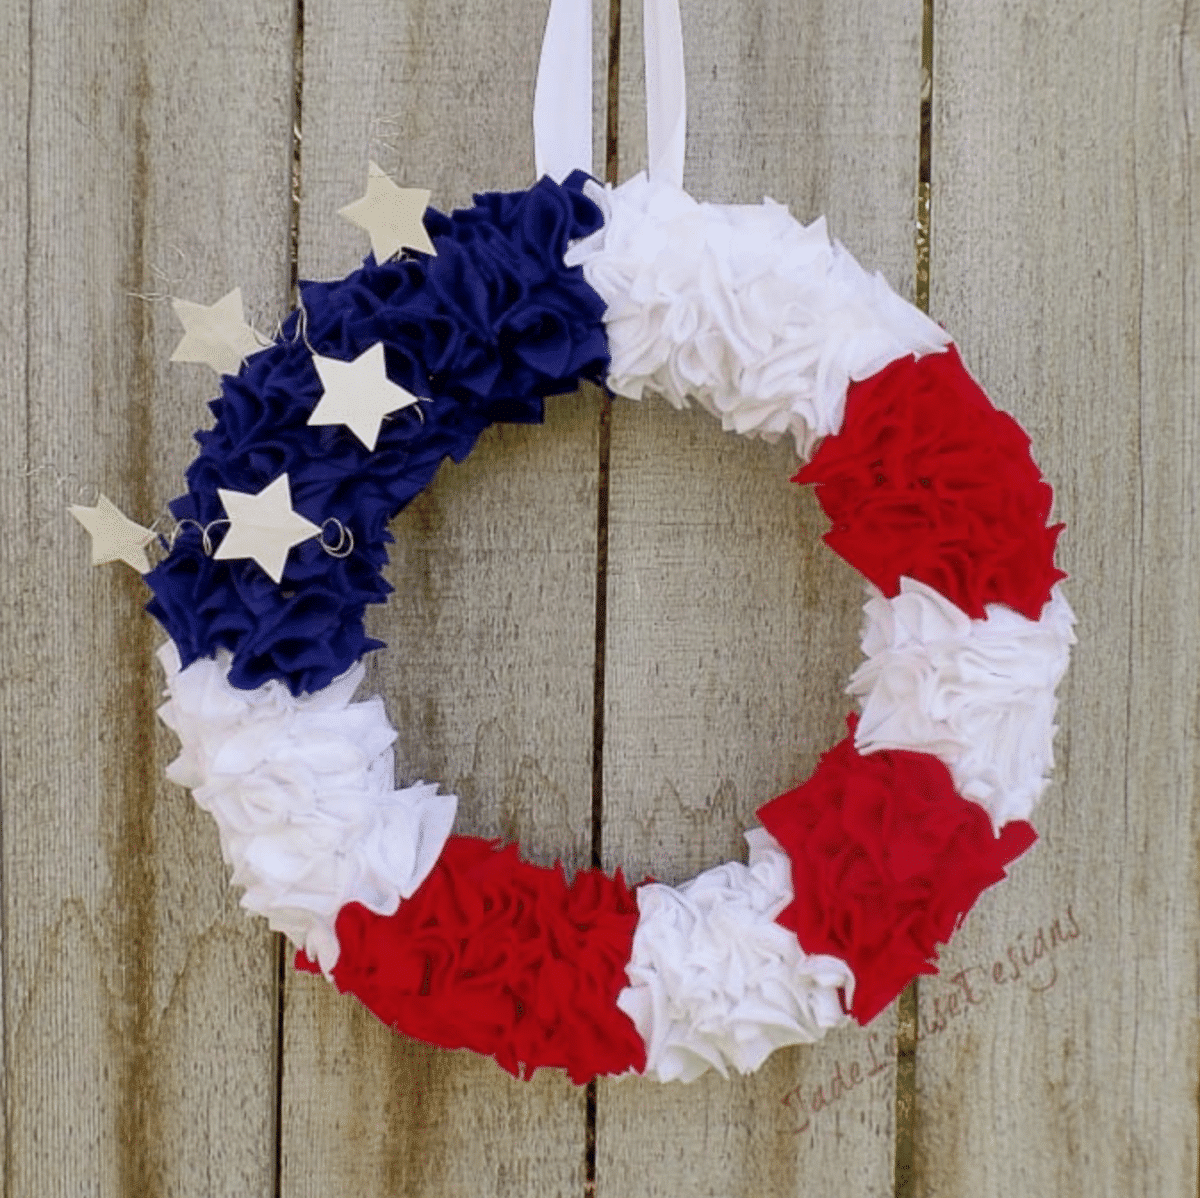 A patriotic Fourth of July wreath featuring red, white, and blue fabric flowers with white stars against a wooden backdrop.